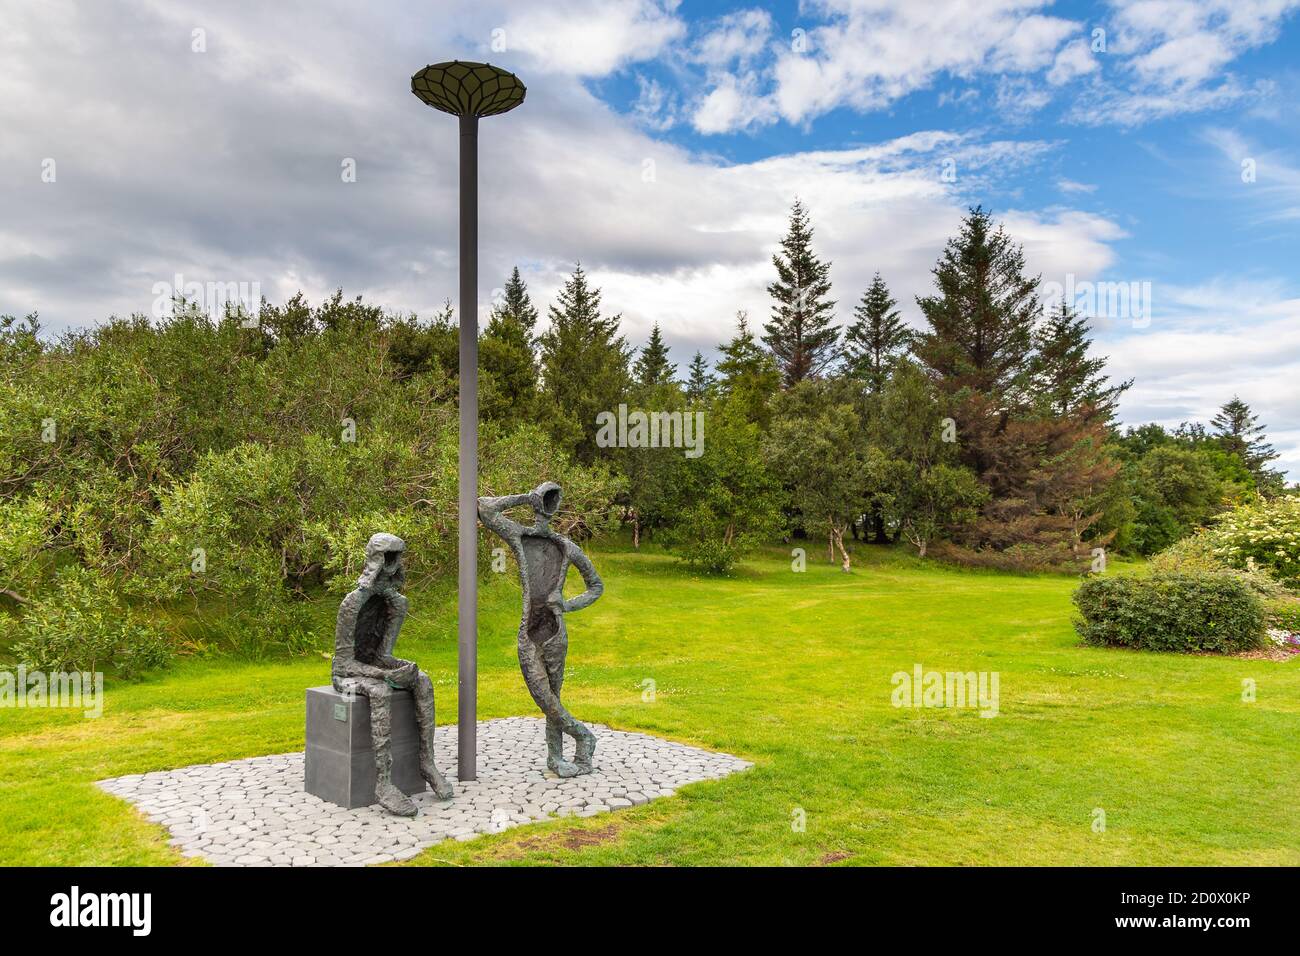 Reykjavik,Iceland- 27 August 2015: Boy and Girl, Monument at Midborg on Lake Tjornin in the city center. Stock Photo